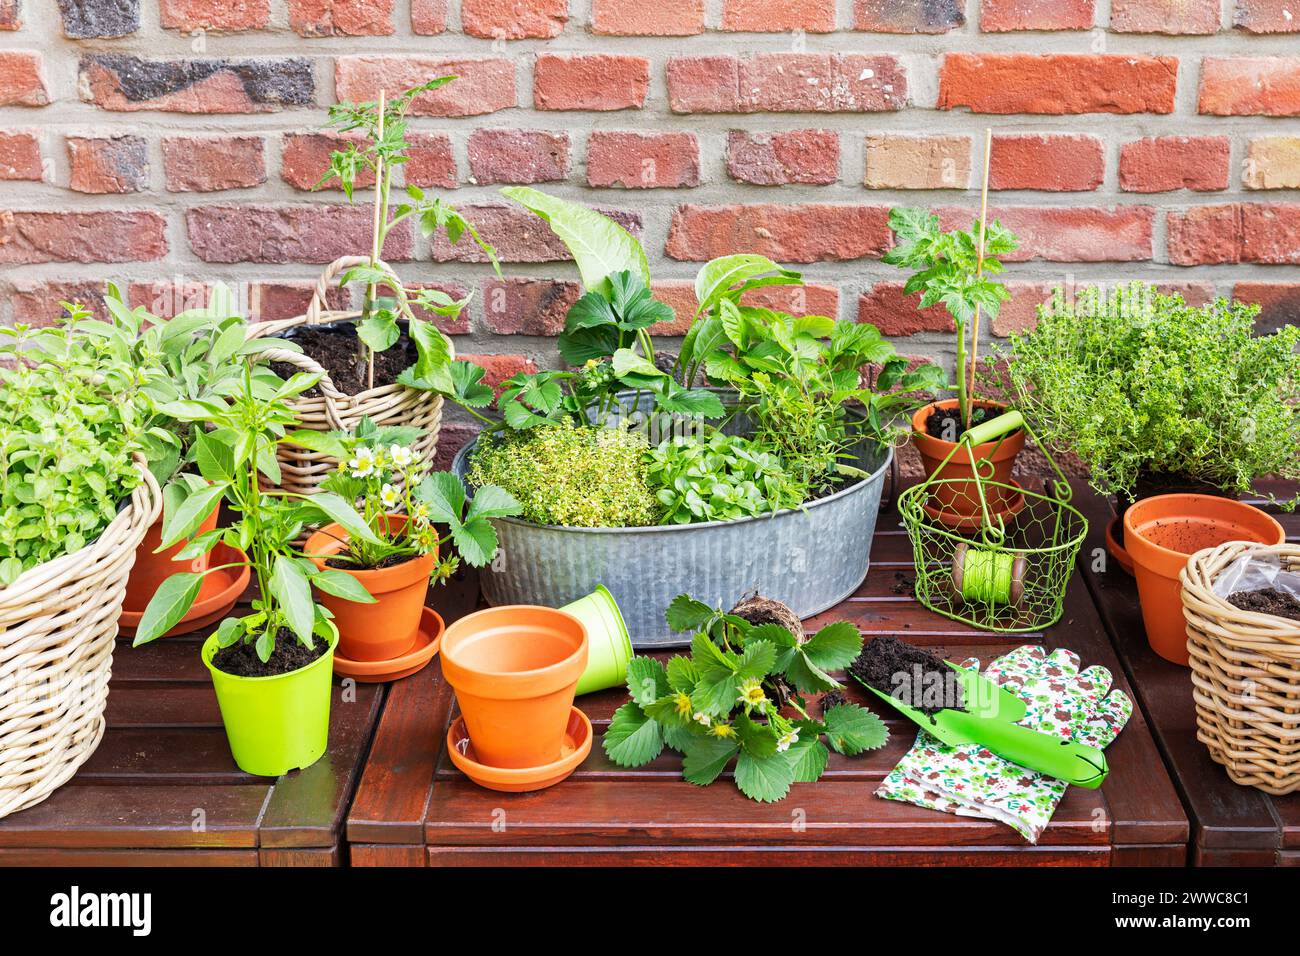 Green herbs cultivated in balcony garden Stock Photo